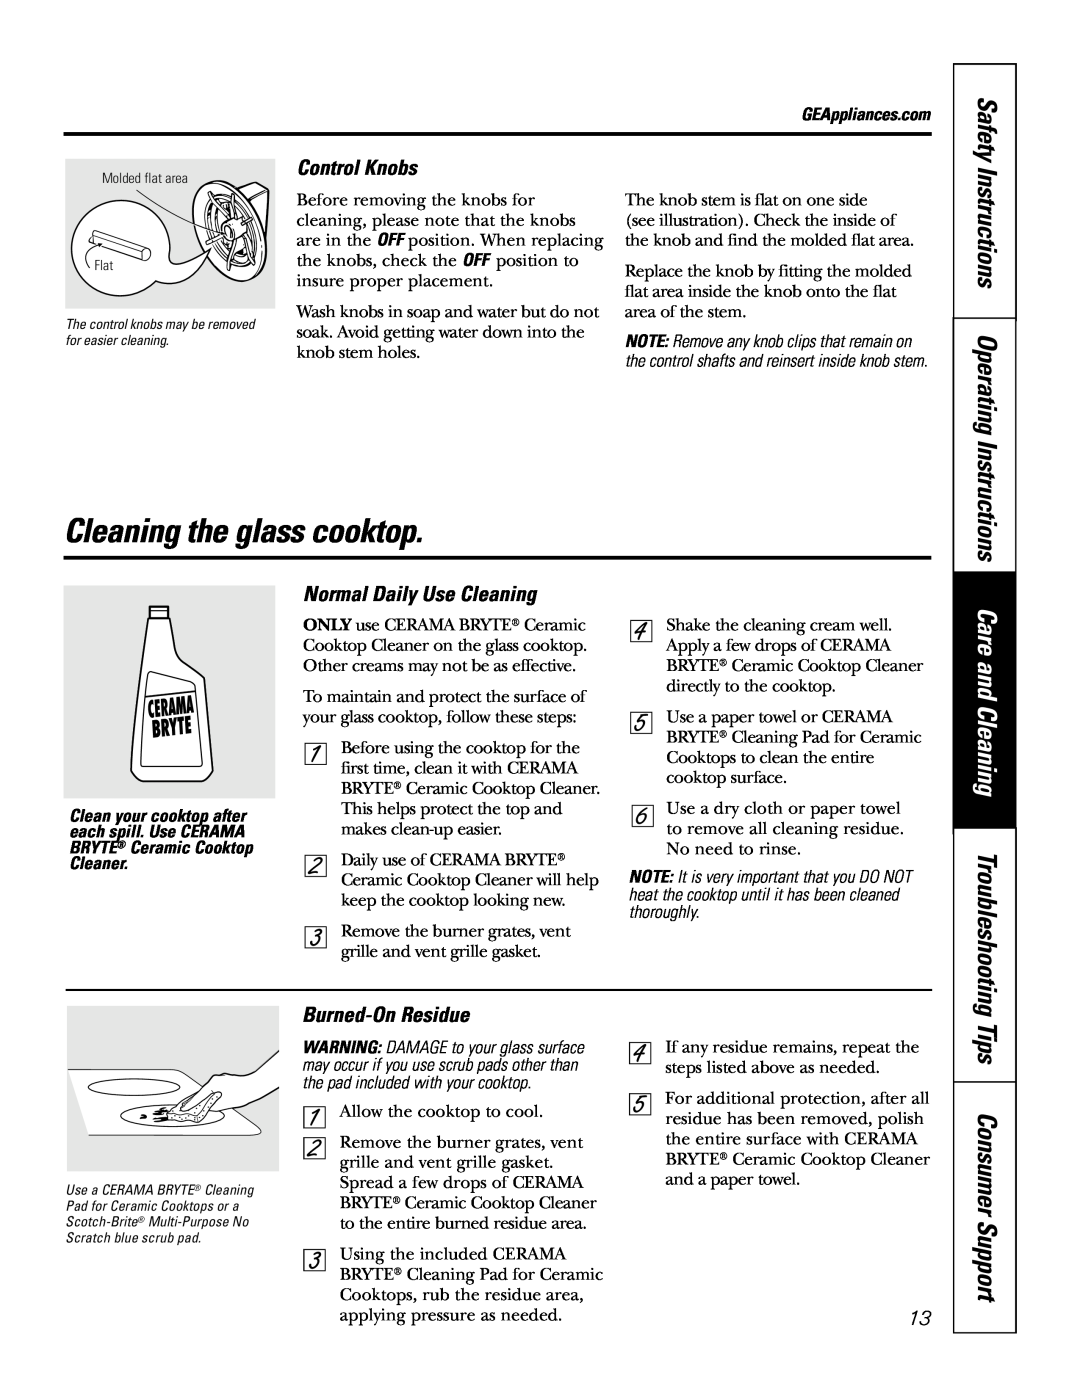 GE JGP989 Cleaning the glass cooktop, Tips Consumer, Support, Care and Cleaning Troubleshooting, Control Knobs, Safety 